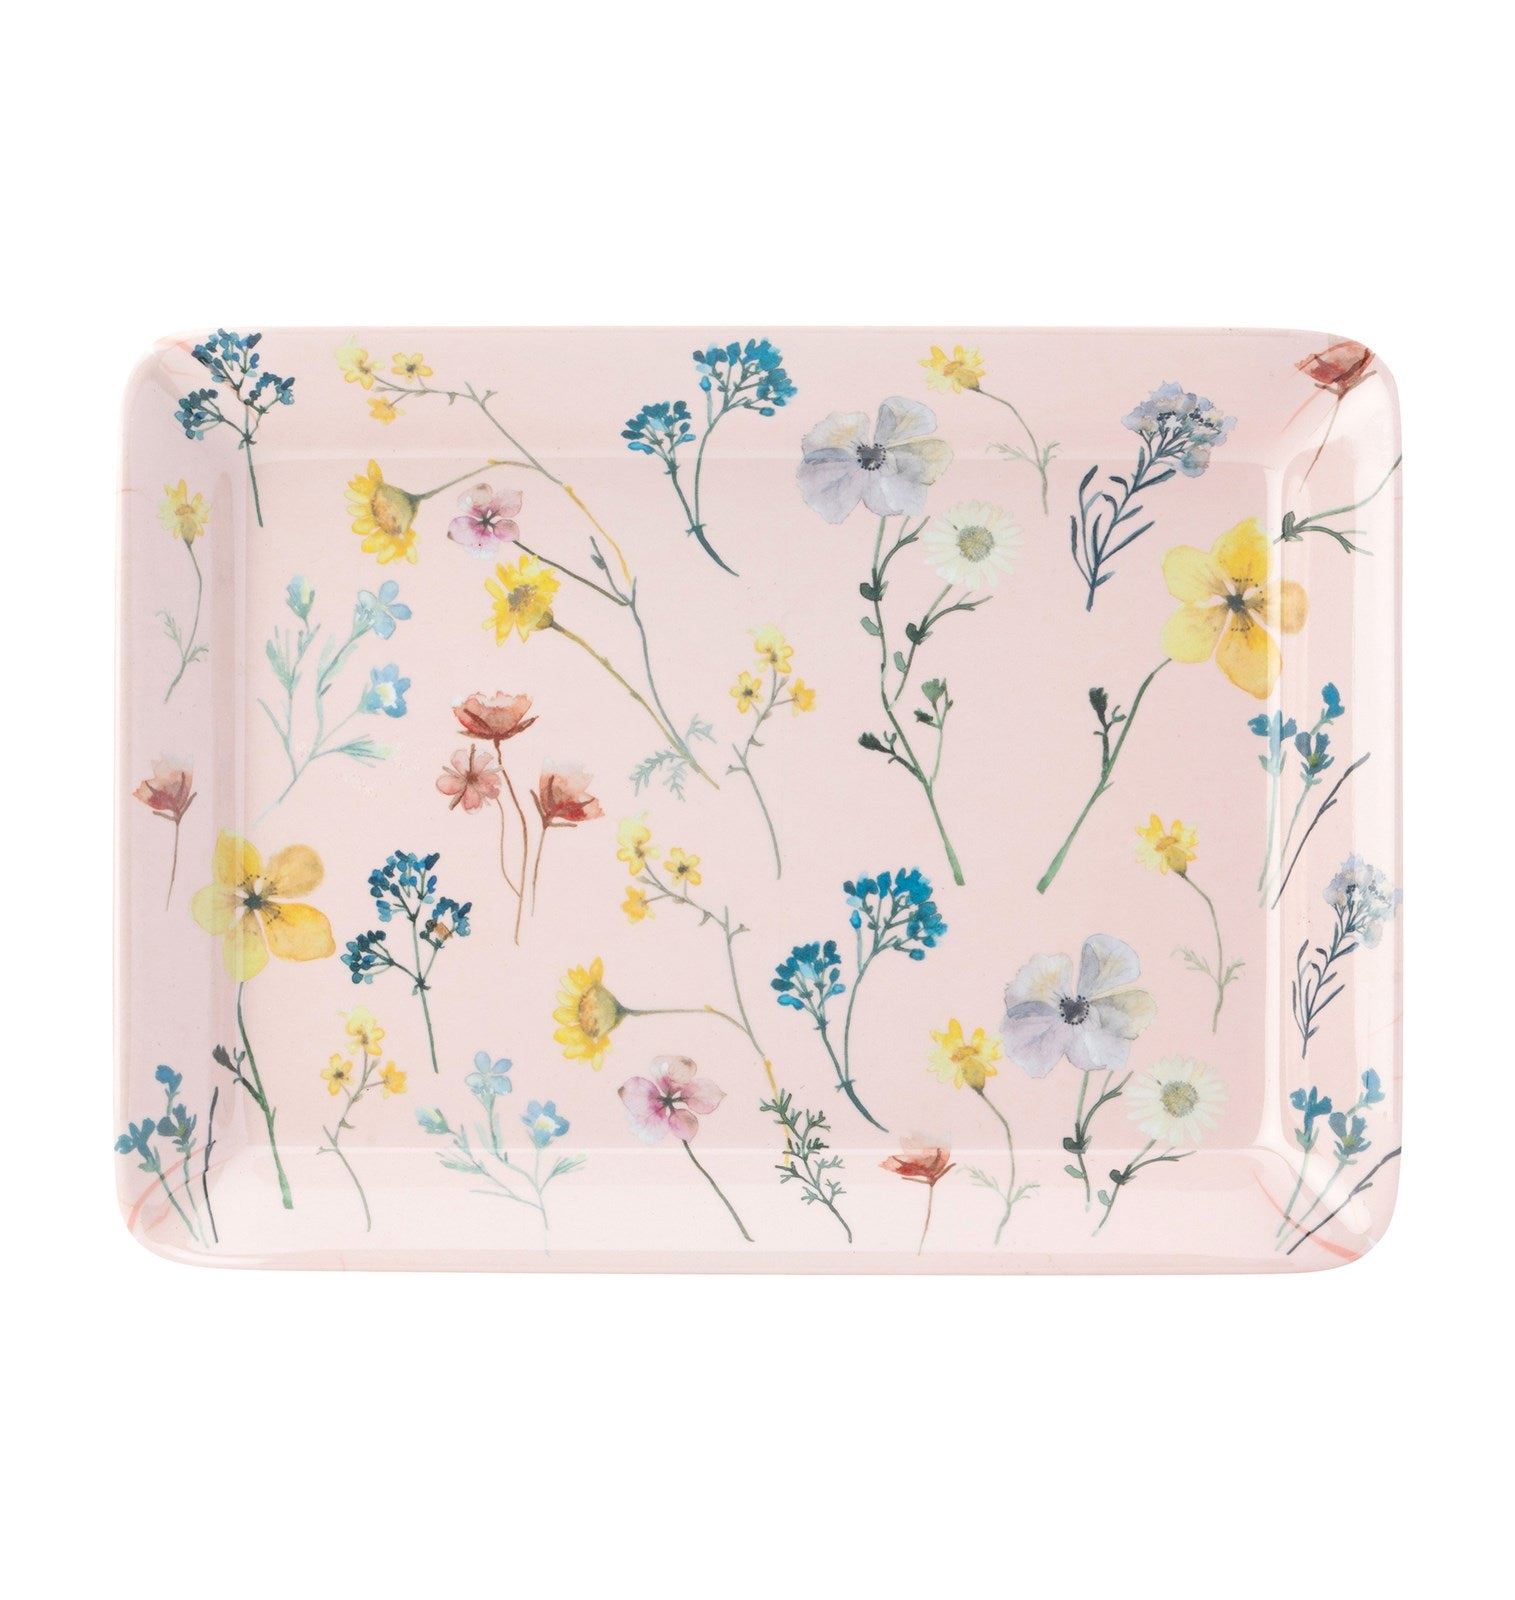 Pressed Flowers Scatter Tray